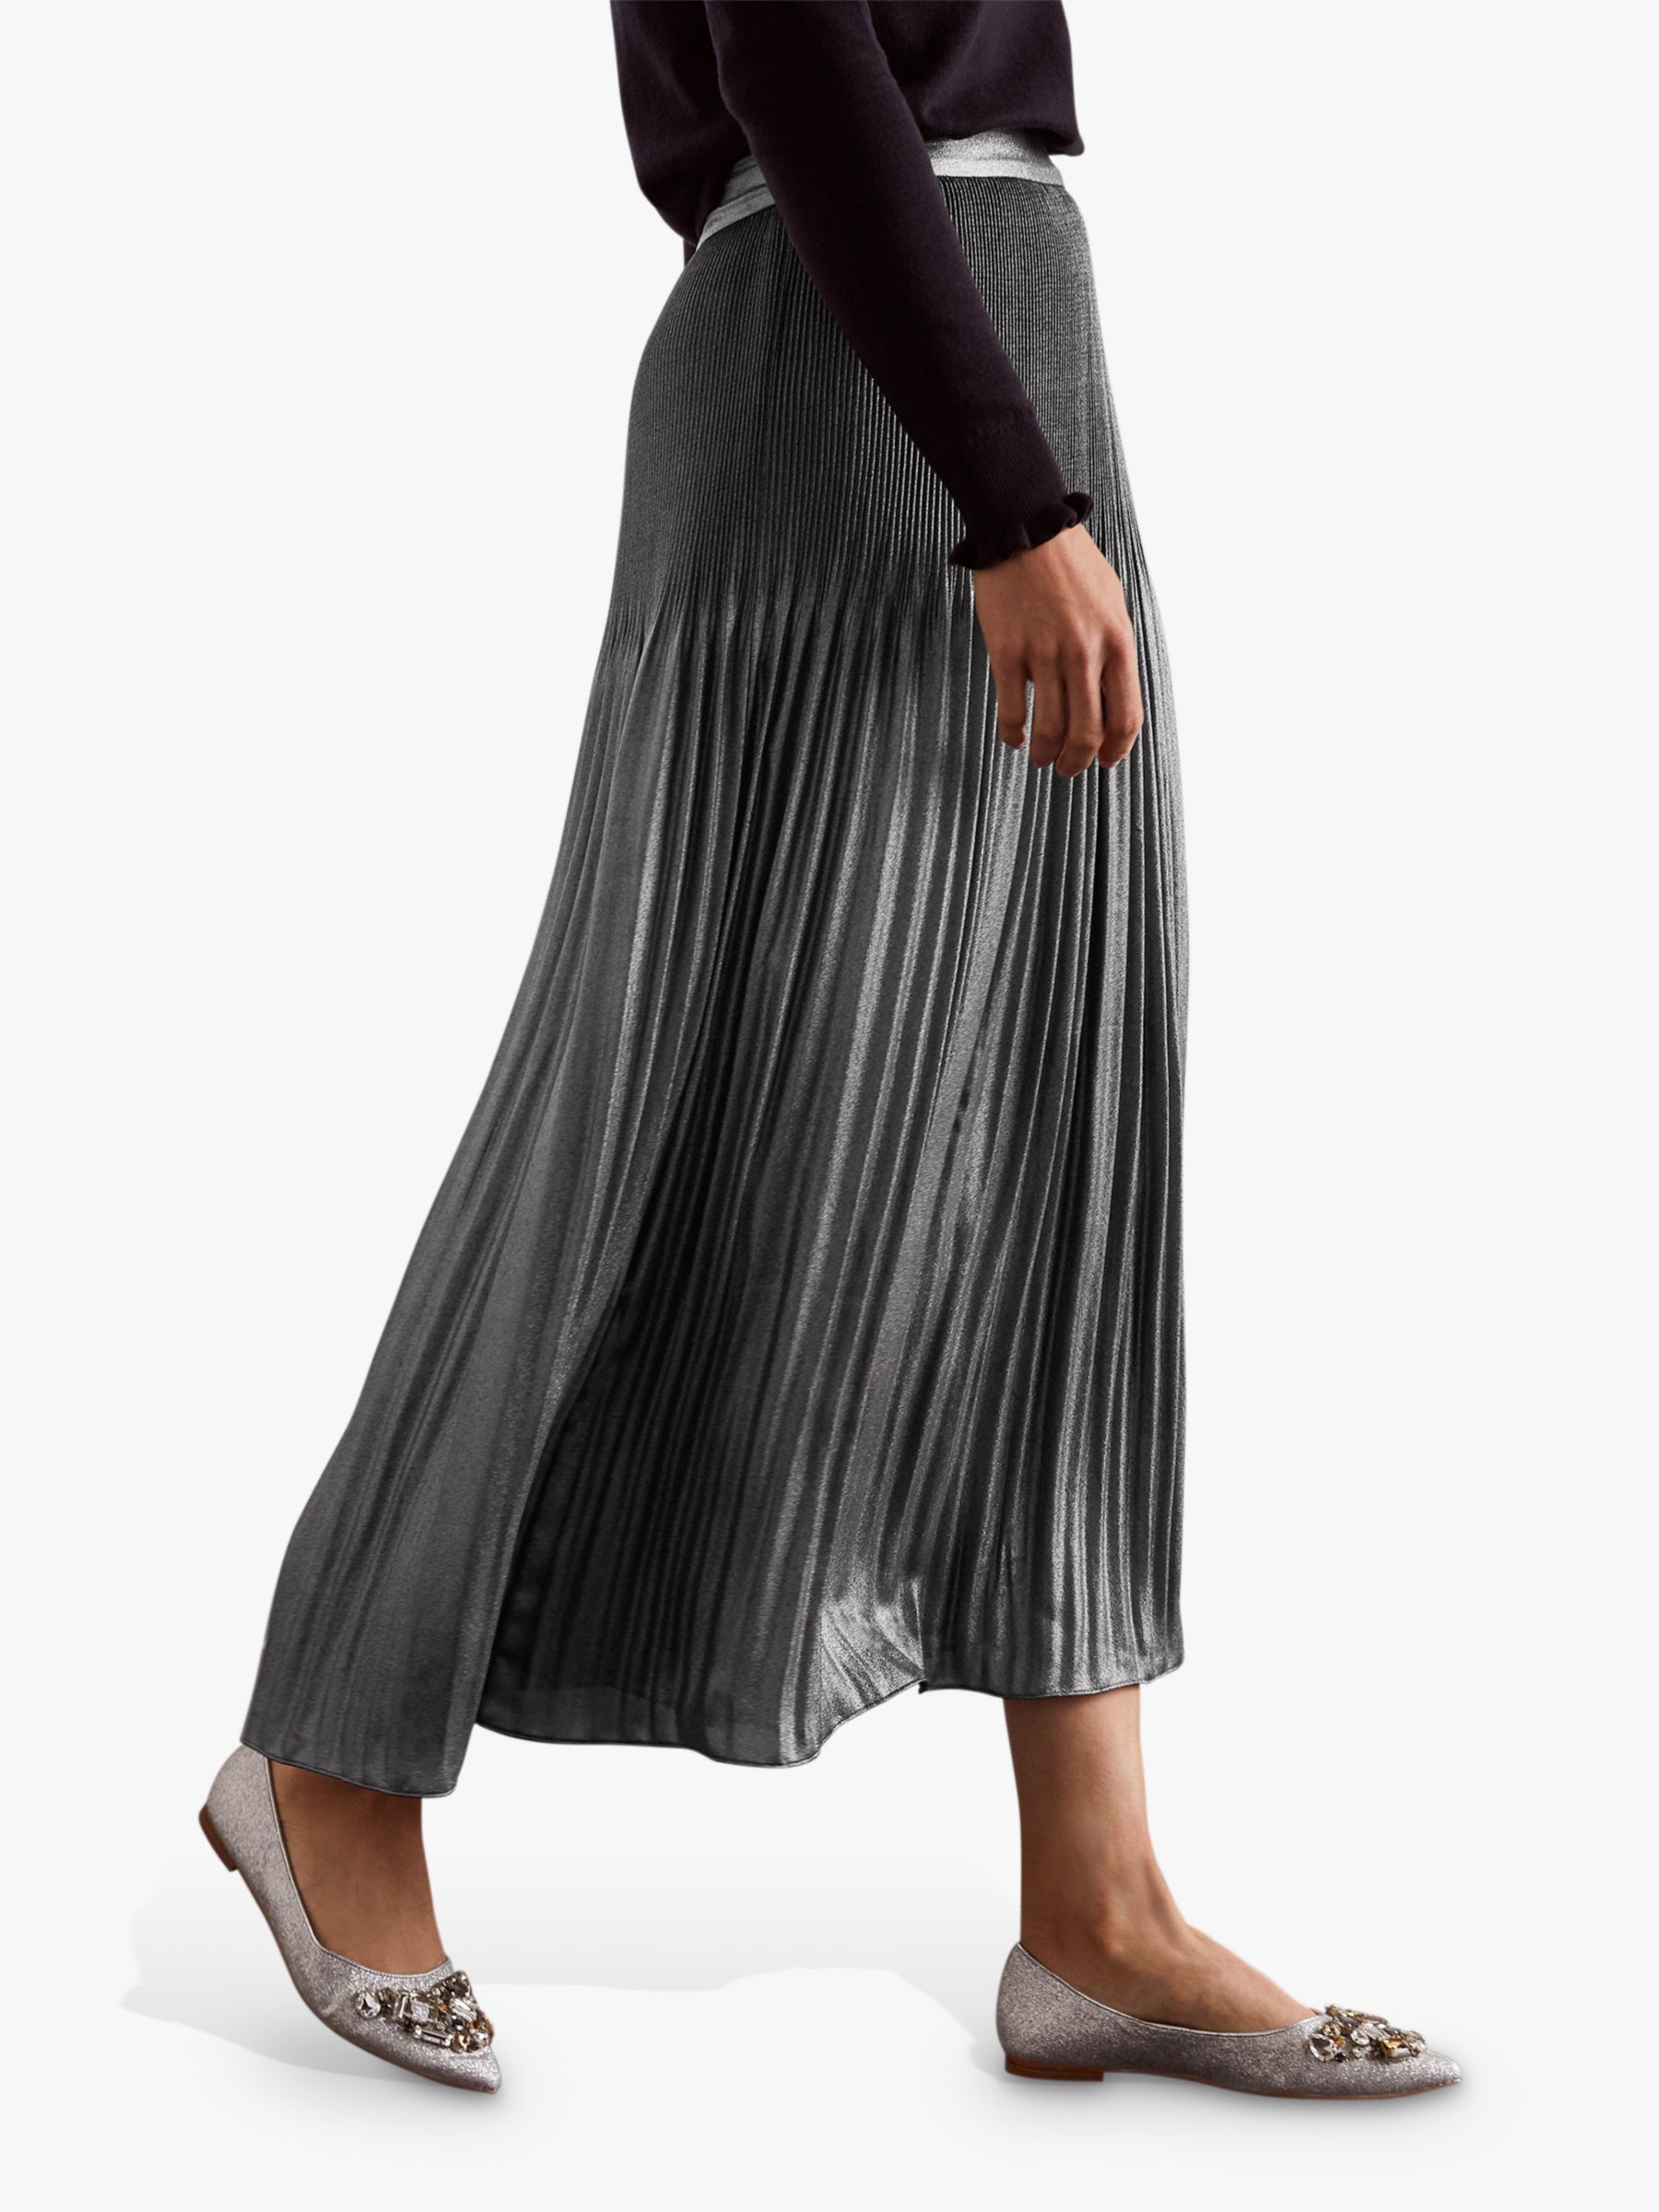 Boden Cassidy Pleated Midi Skirt, Pewter